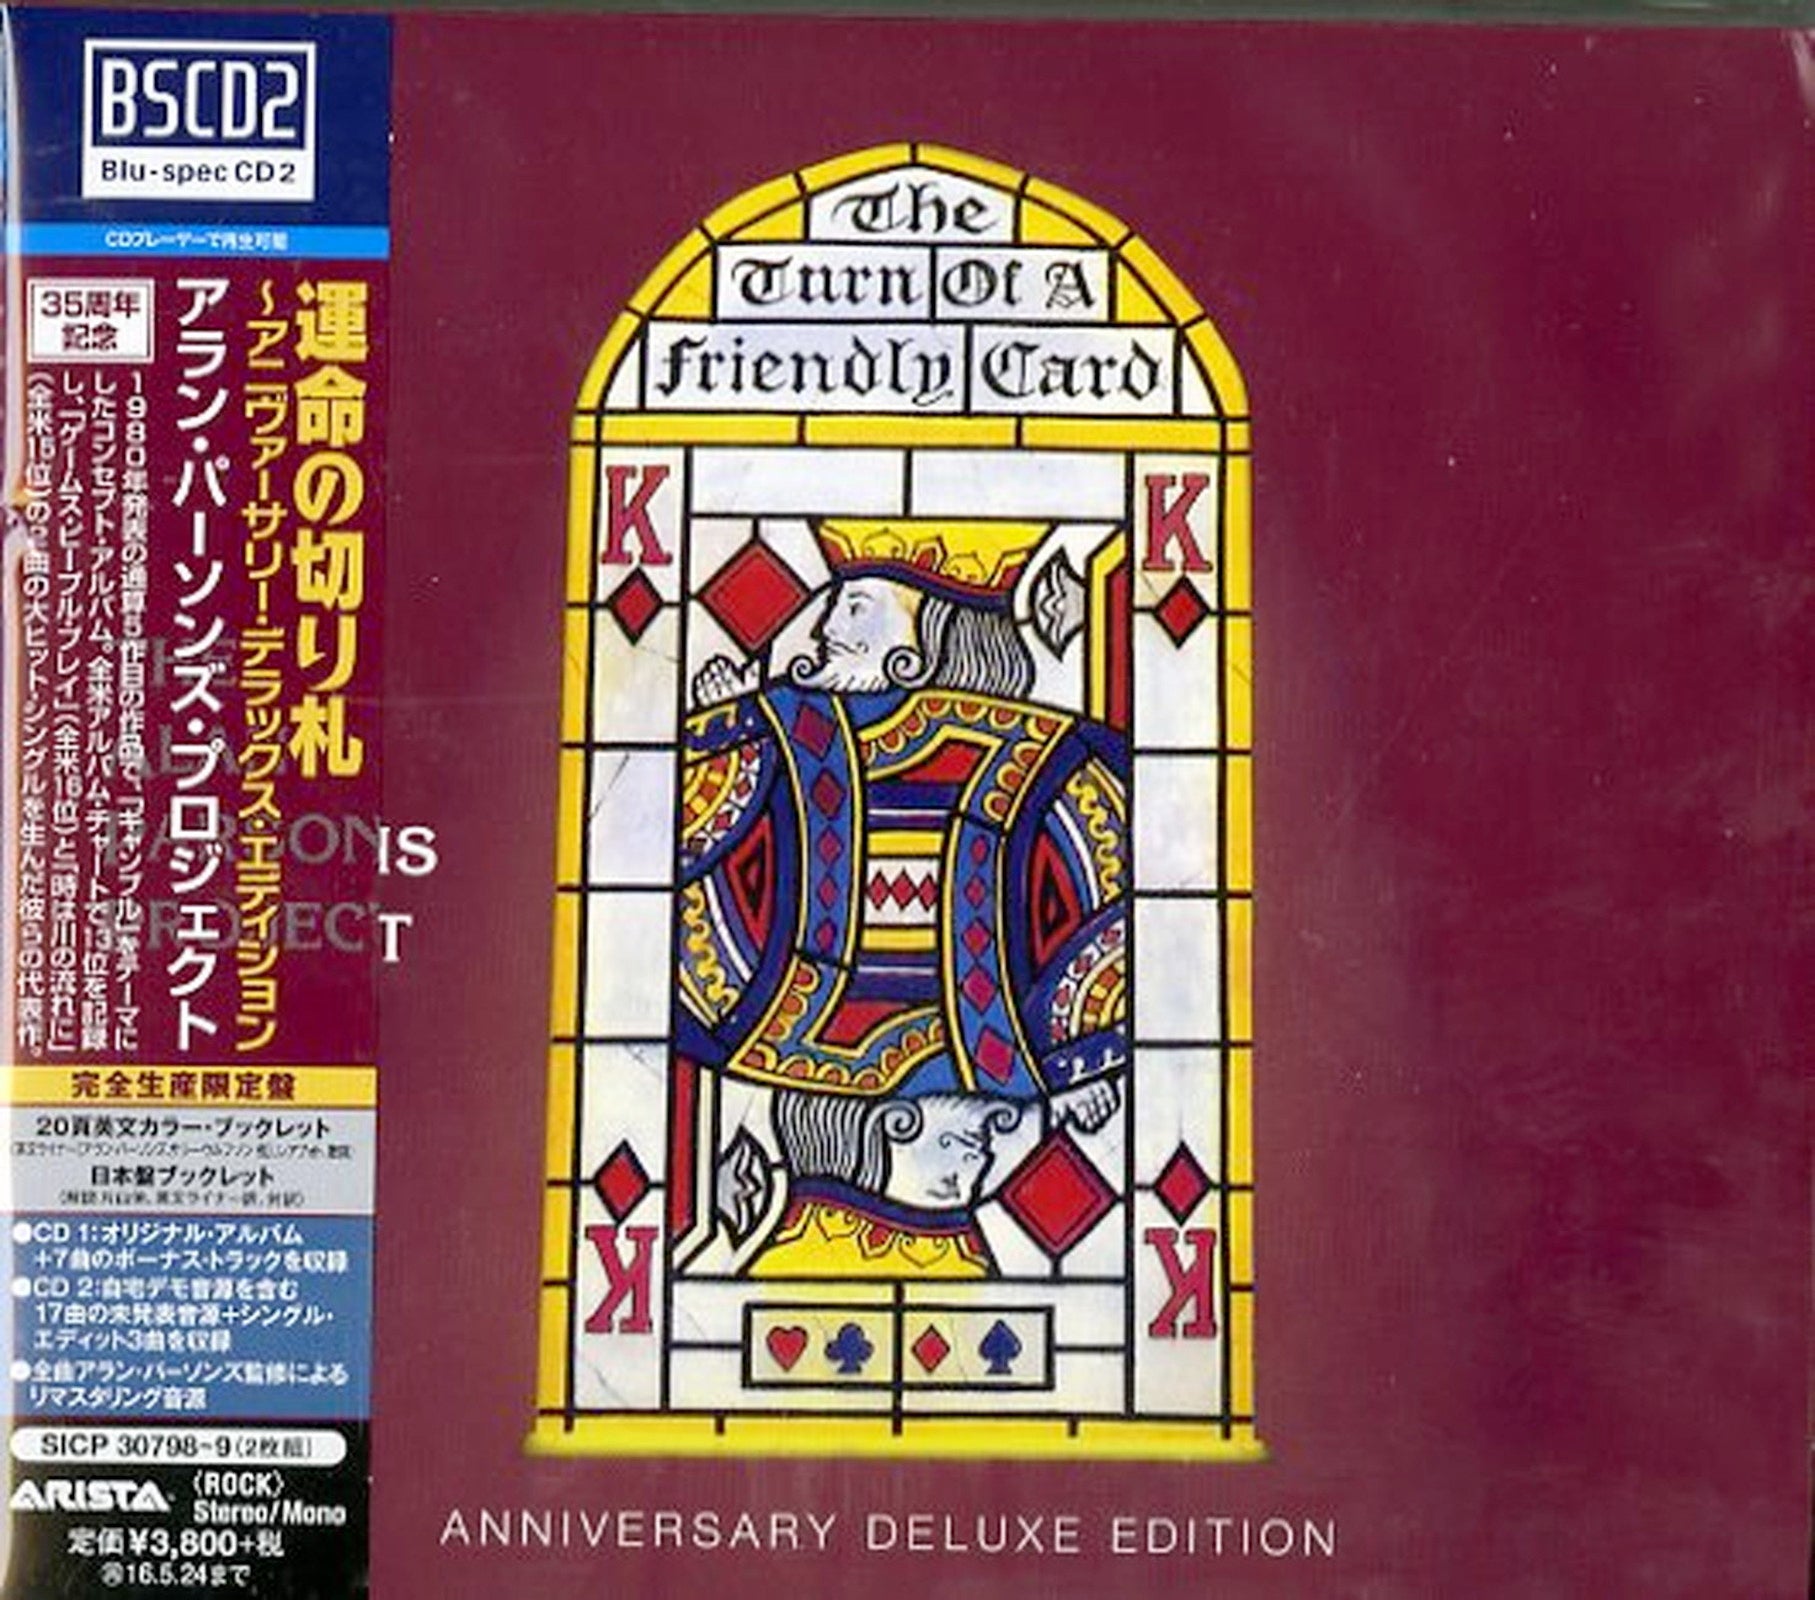 The Alan Parsons Project - The Turn Of A Friendly Card Legacy Edition – CDs  Vinyl Japan Store Alan Parsons Project